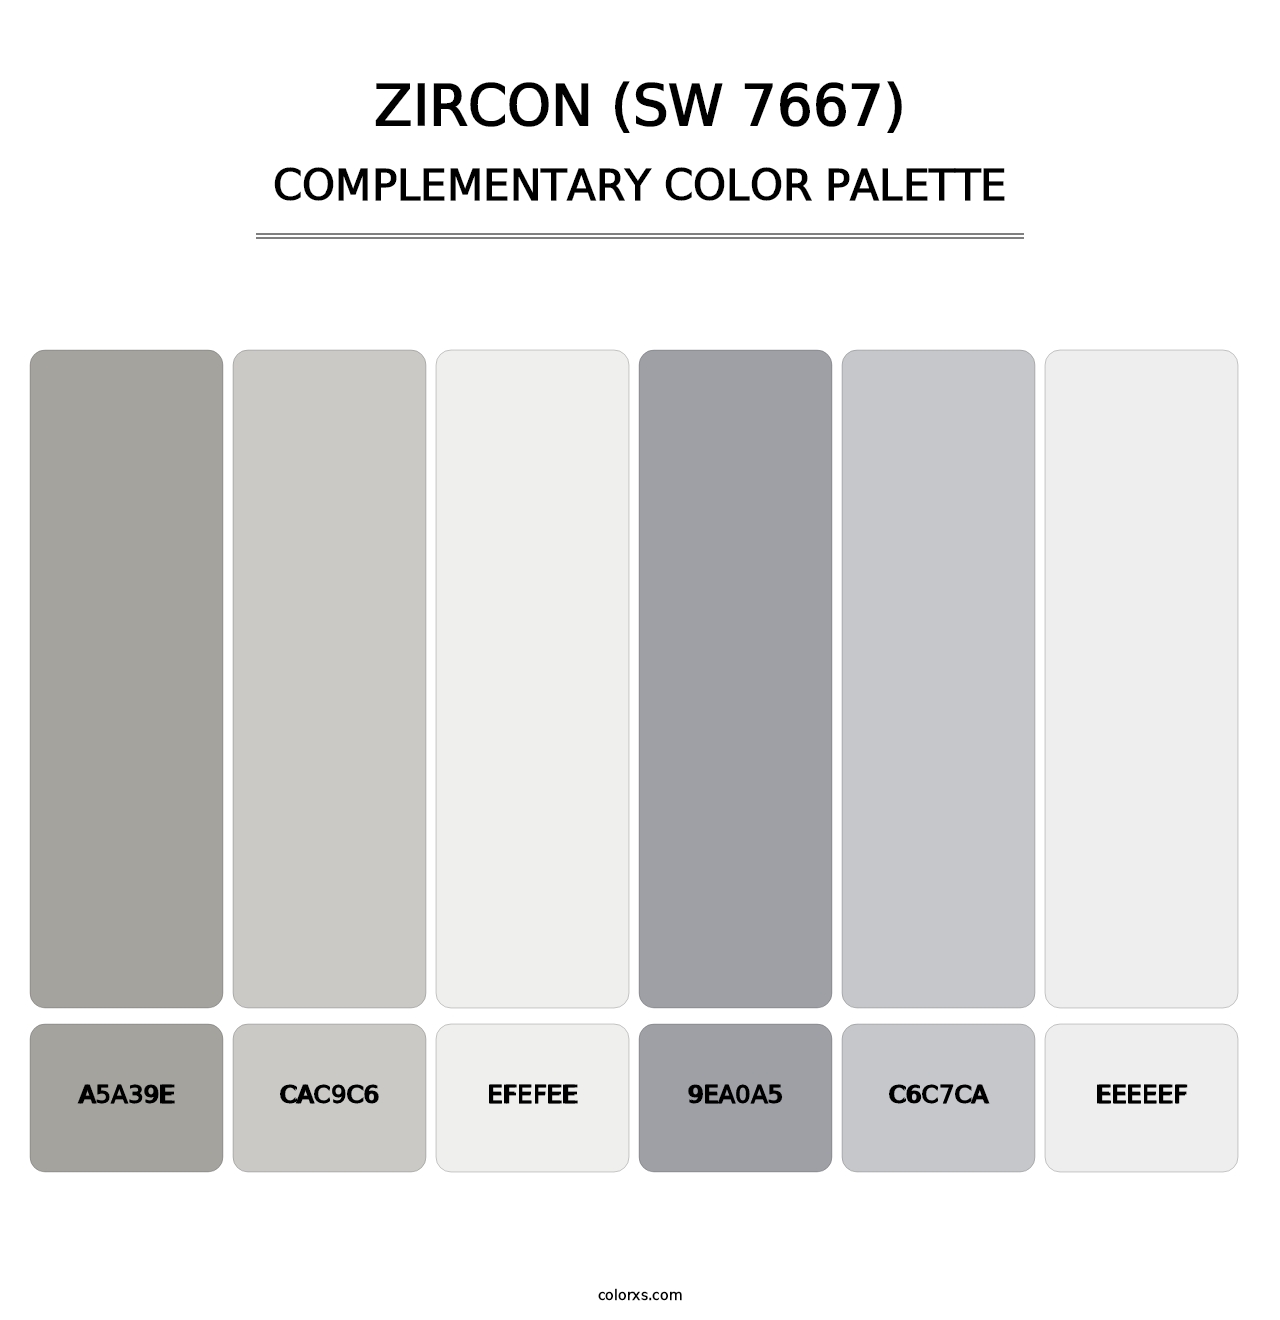 Zircon (SW 7667) - Complementary Color Palette